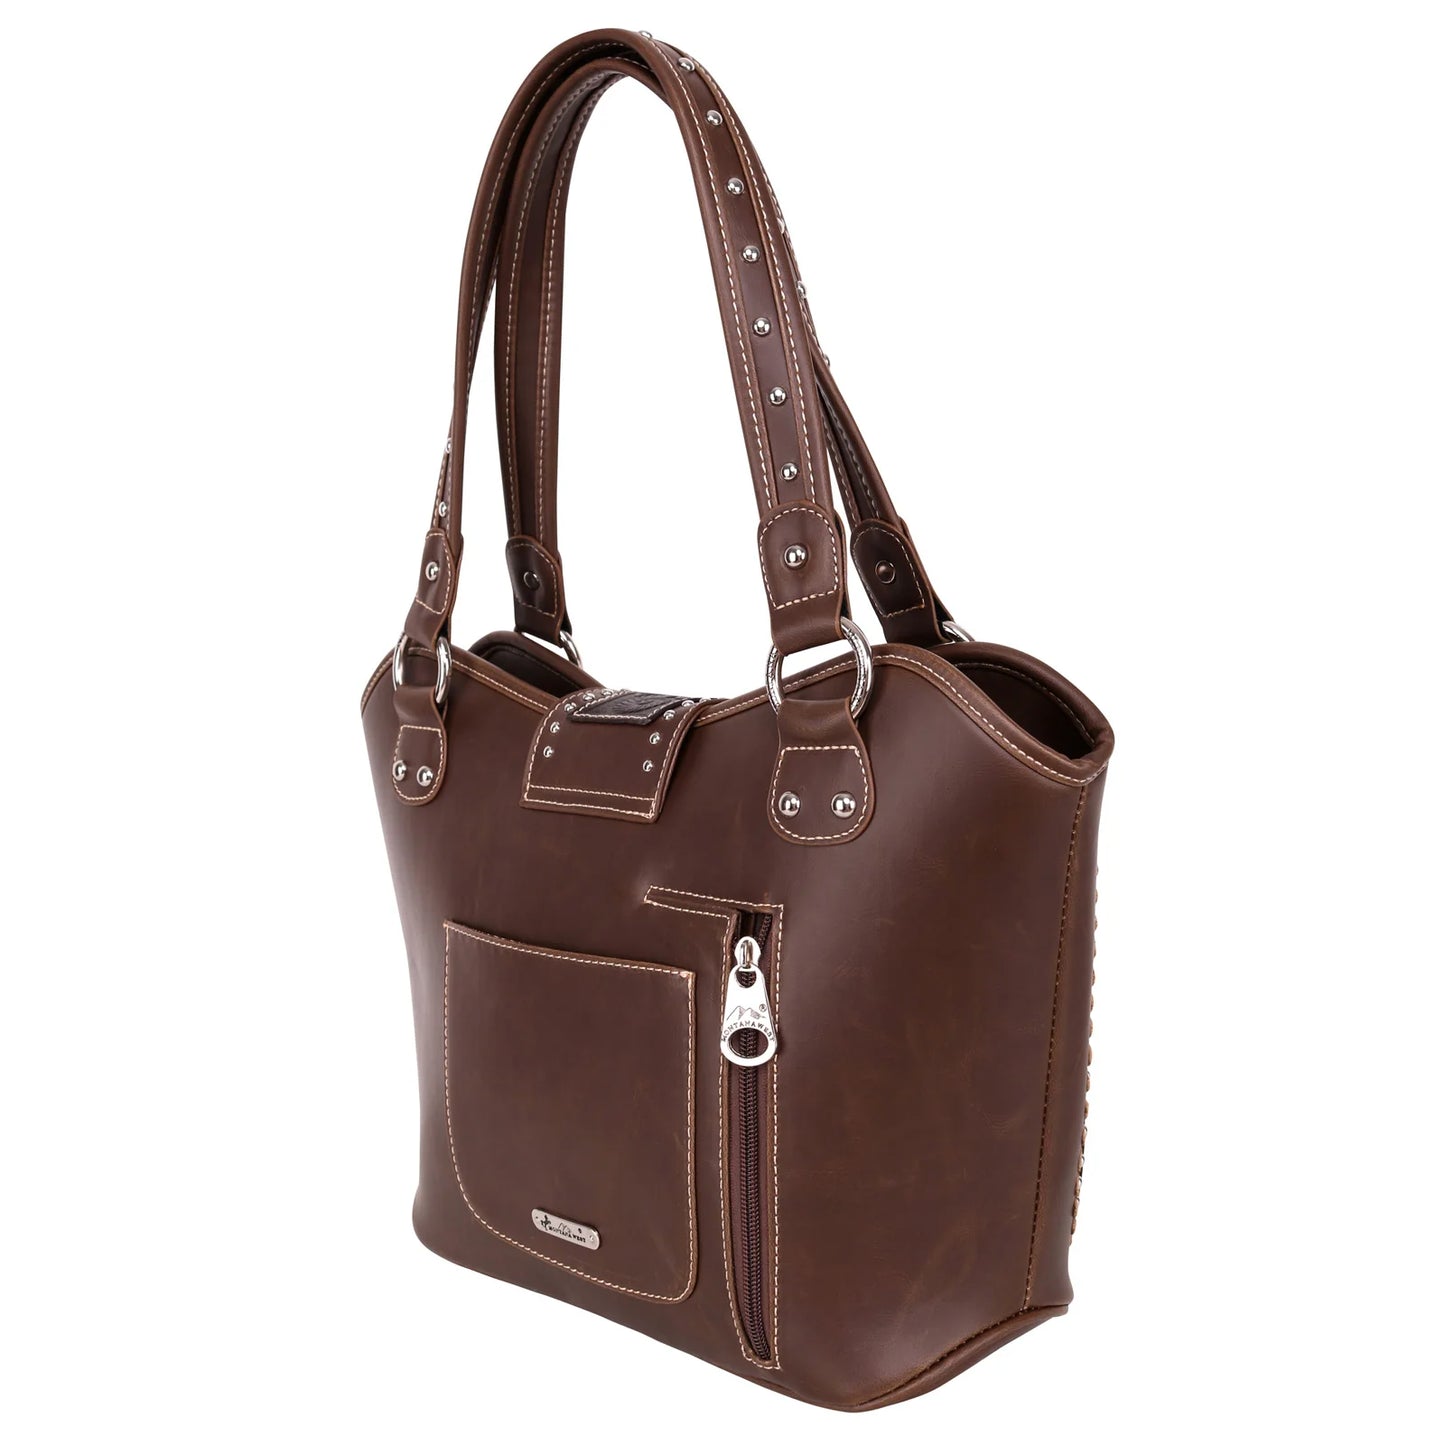 WRLG8005 - Montana West Tooling Concealed Carry Collection Handbag